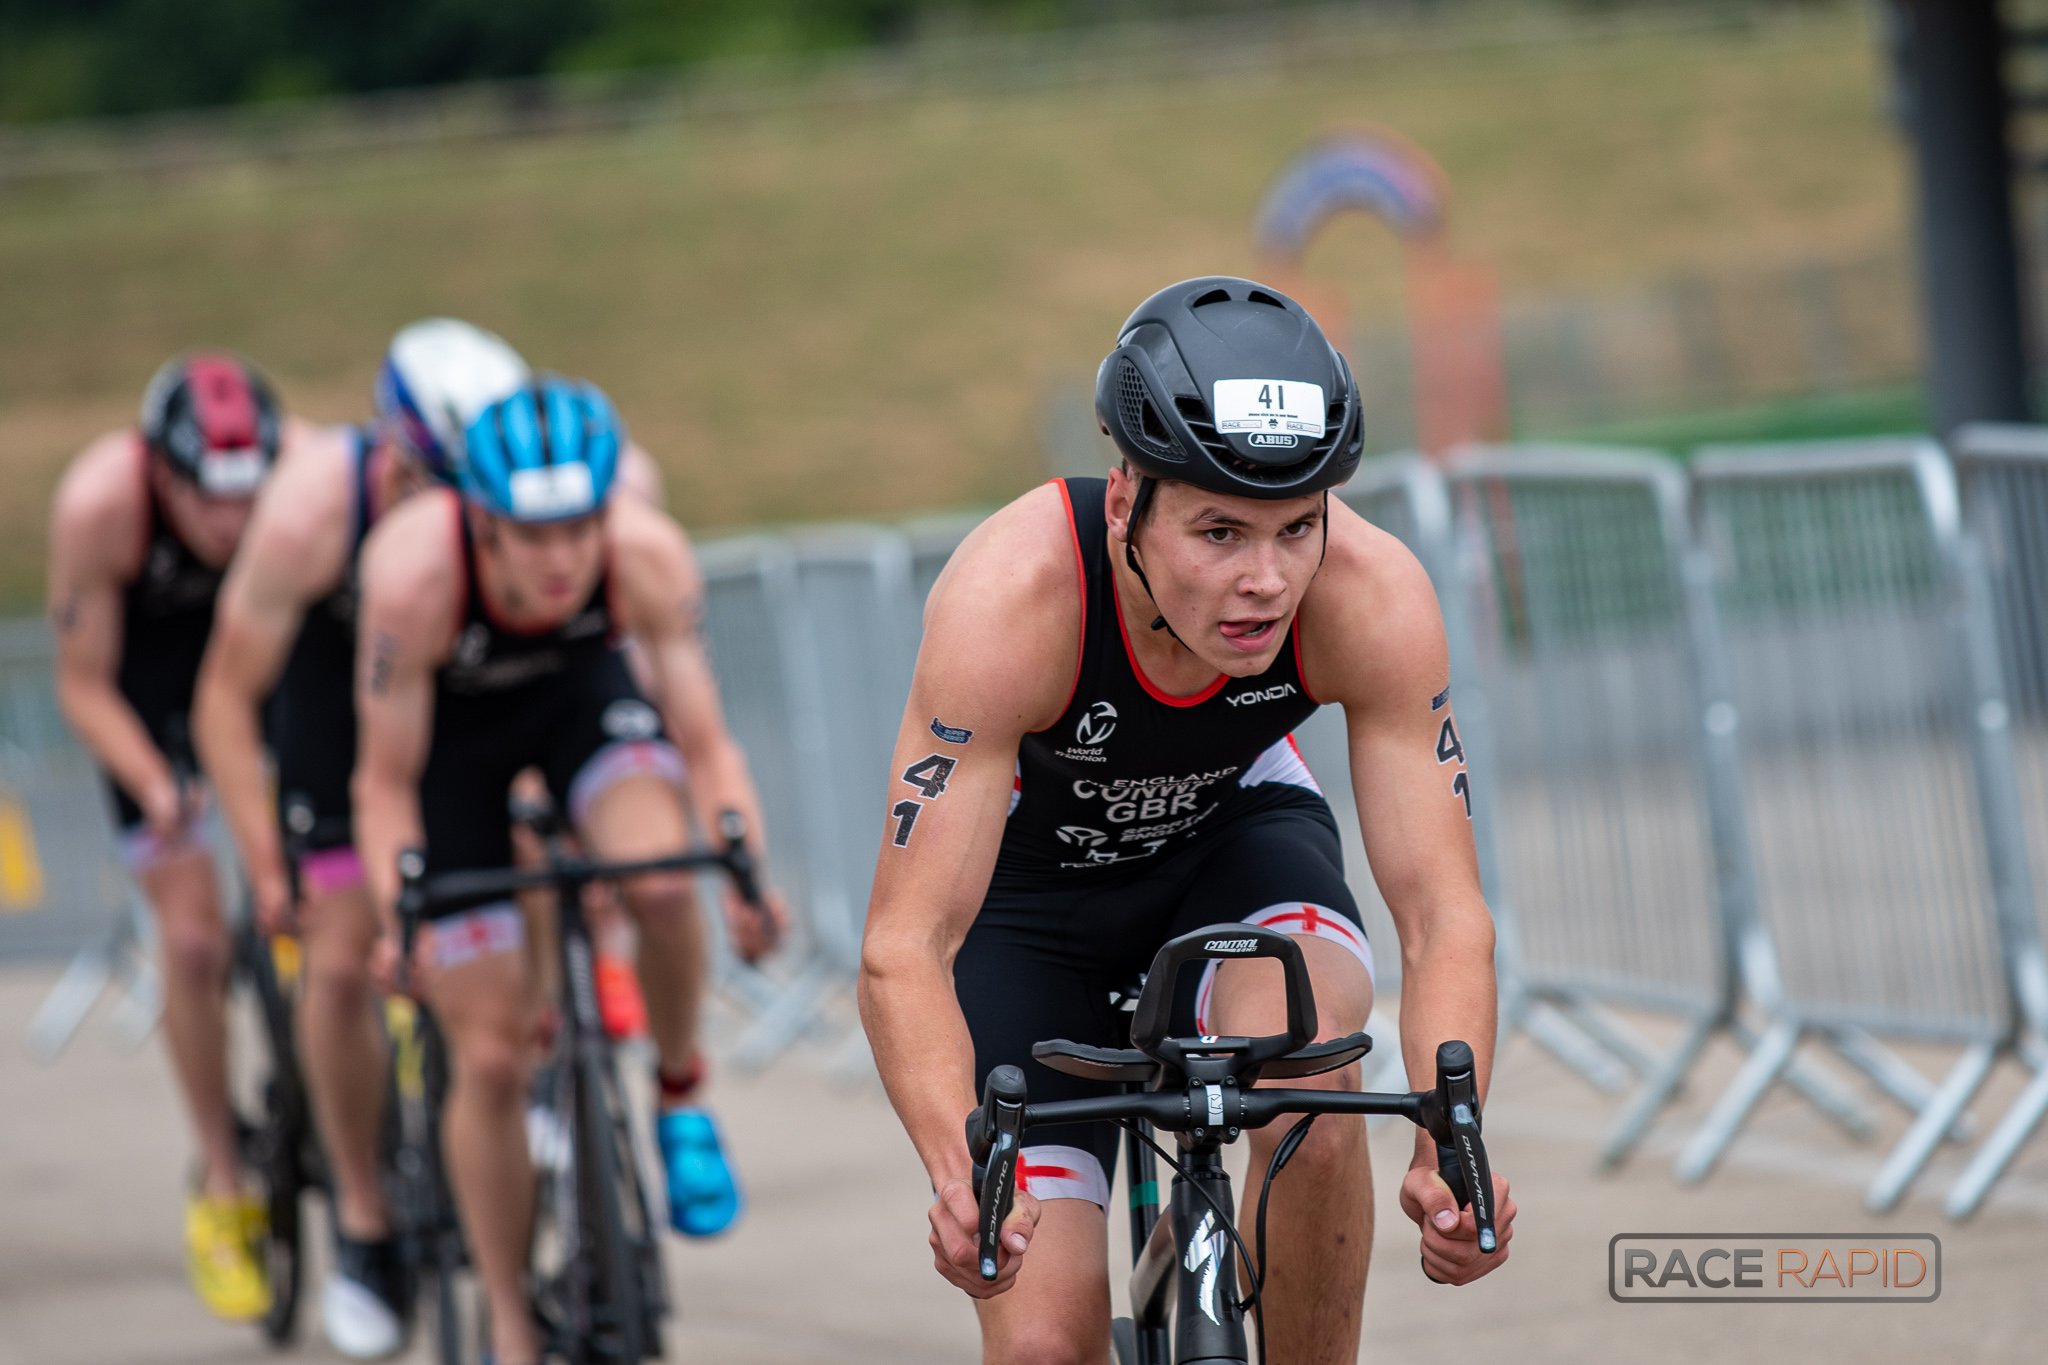 The story so far in the British Triathlon Youth & Junior Super Series (Youth)